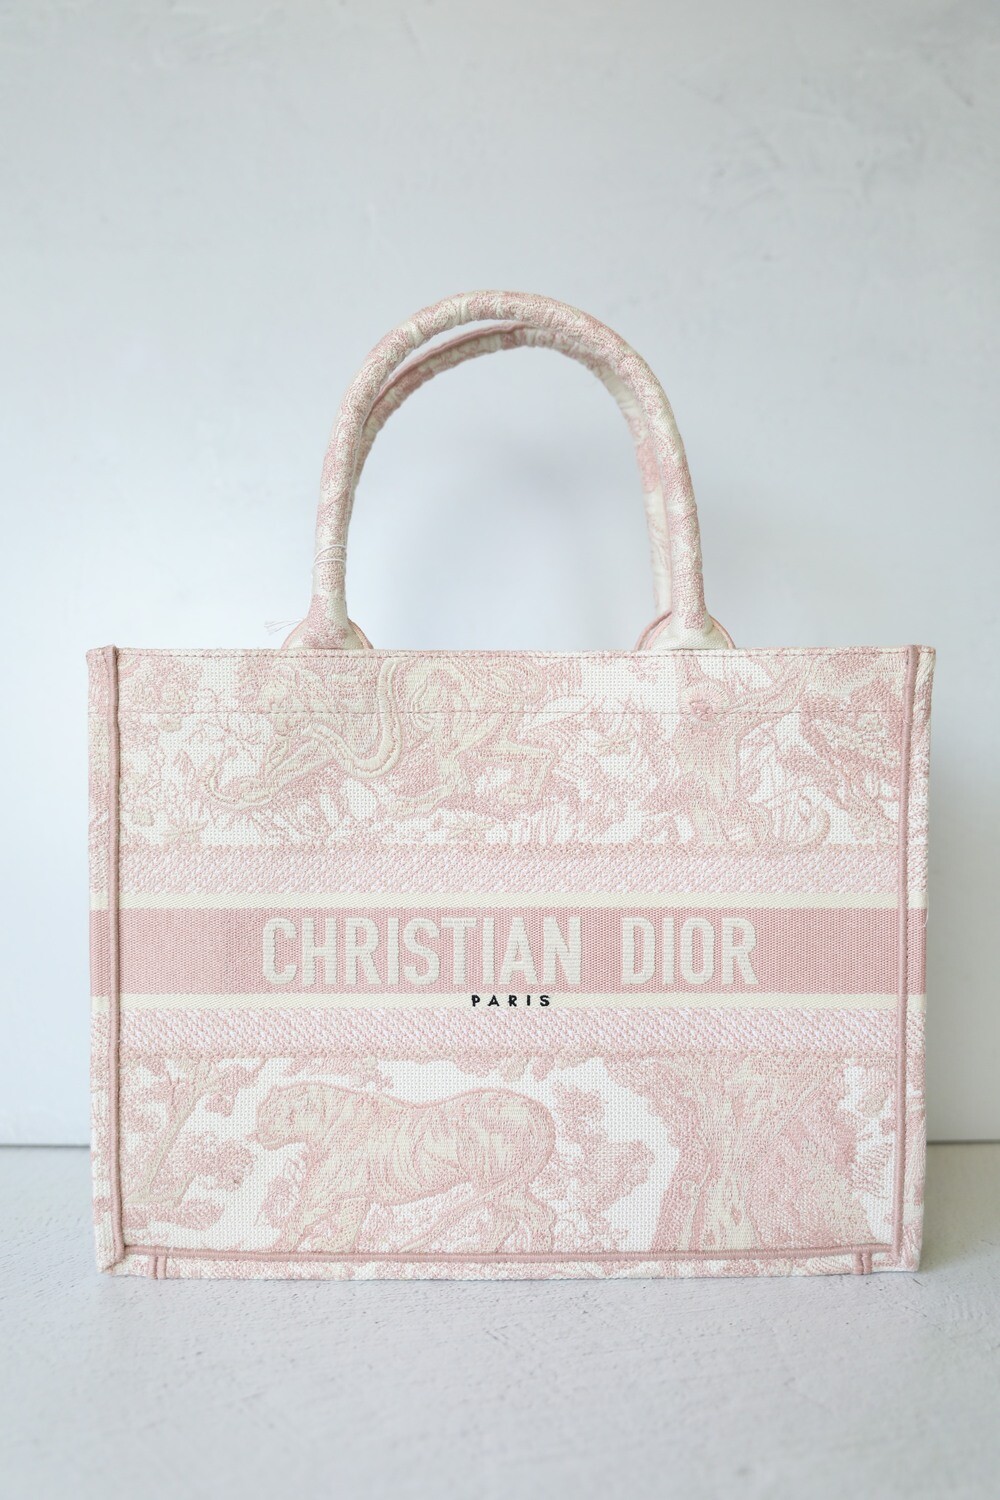 Christian Dior Book Tote Medium, Pink Toile De Jouy, Preowned in